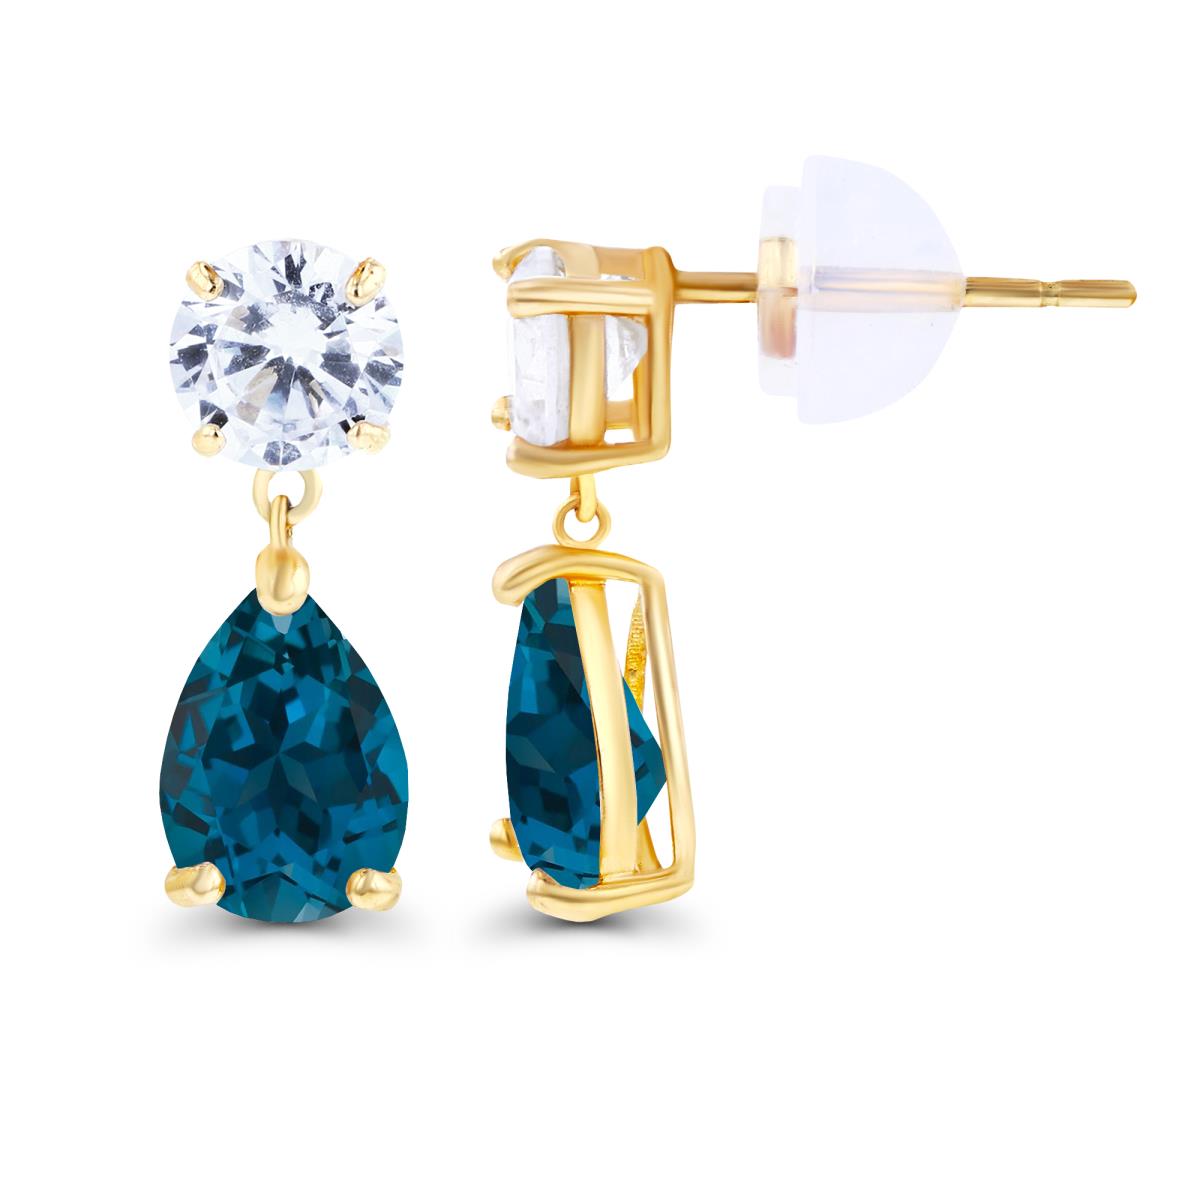 14K Yellow Gold 6x4mm Pear London Blue Topaz & 4.5mm Round Created White Sapphire Earrings with Silicon Backs